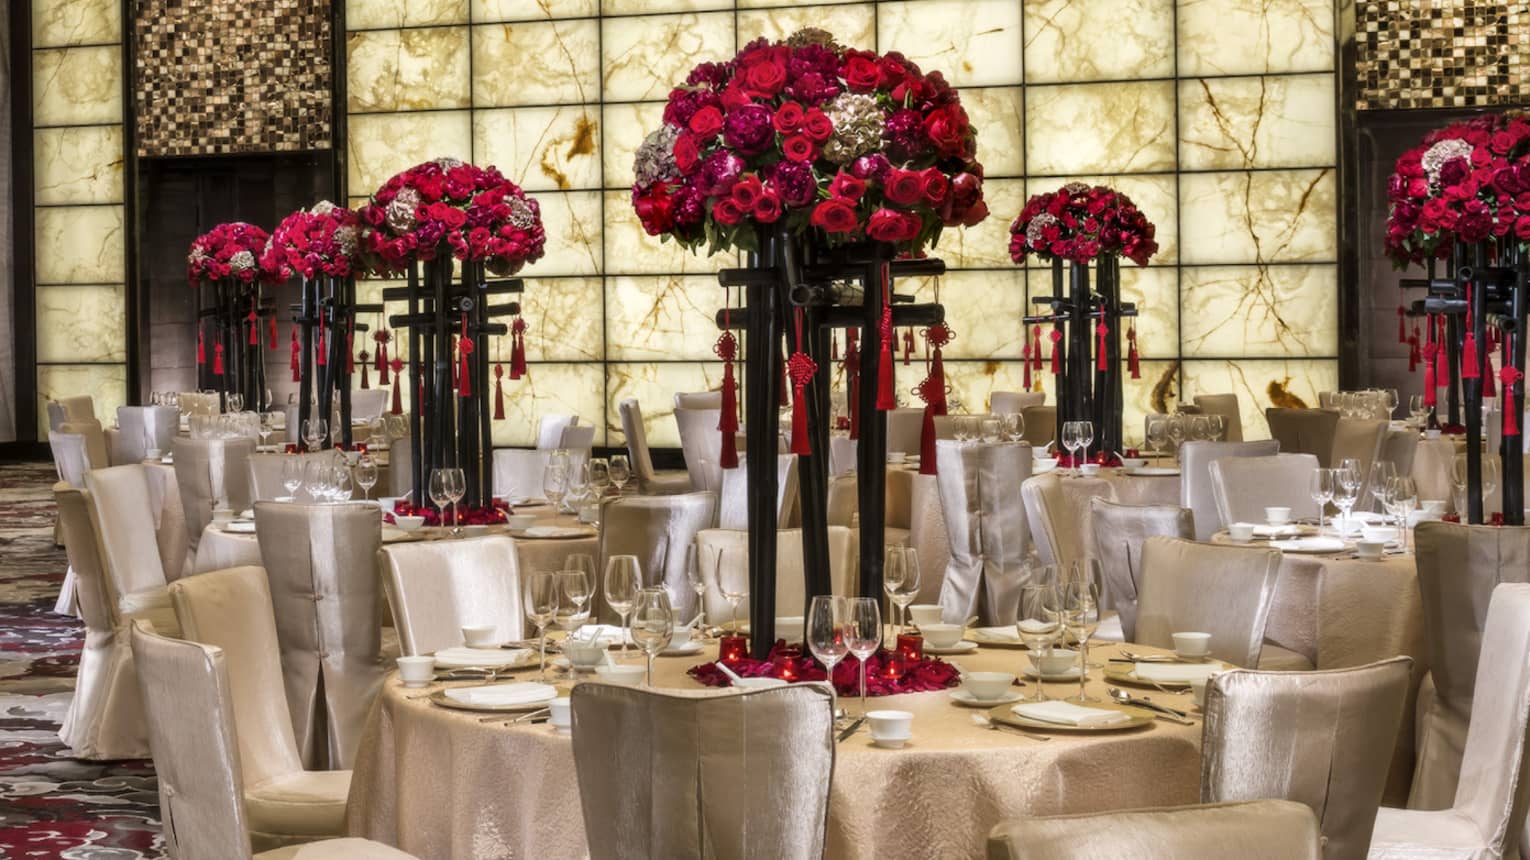 Grand Ballroom banquet tables and chairs with silk linens, red flowers in tall vases 